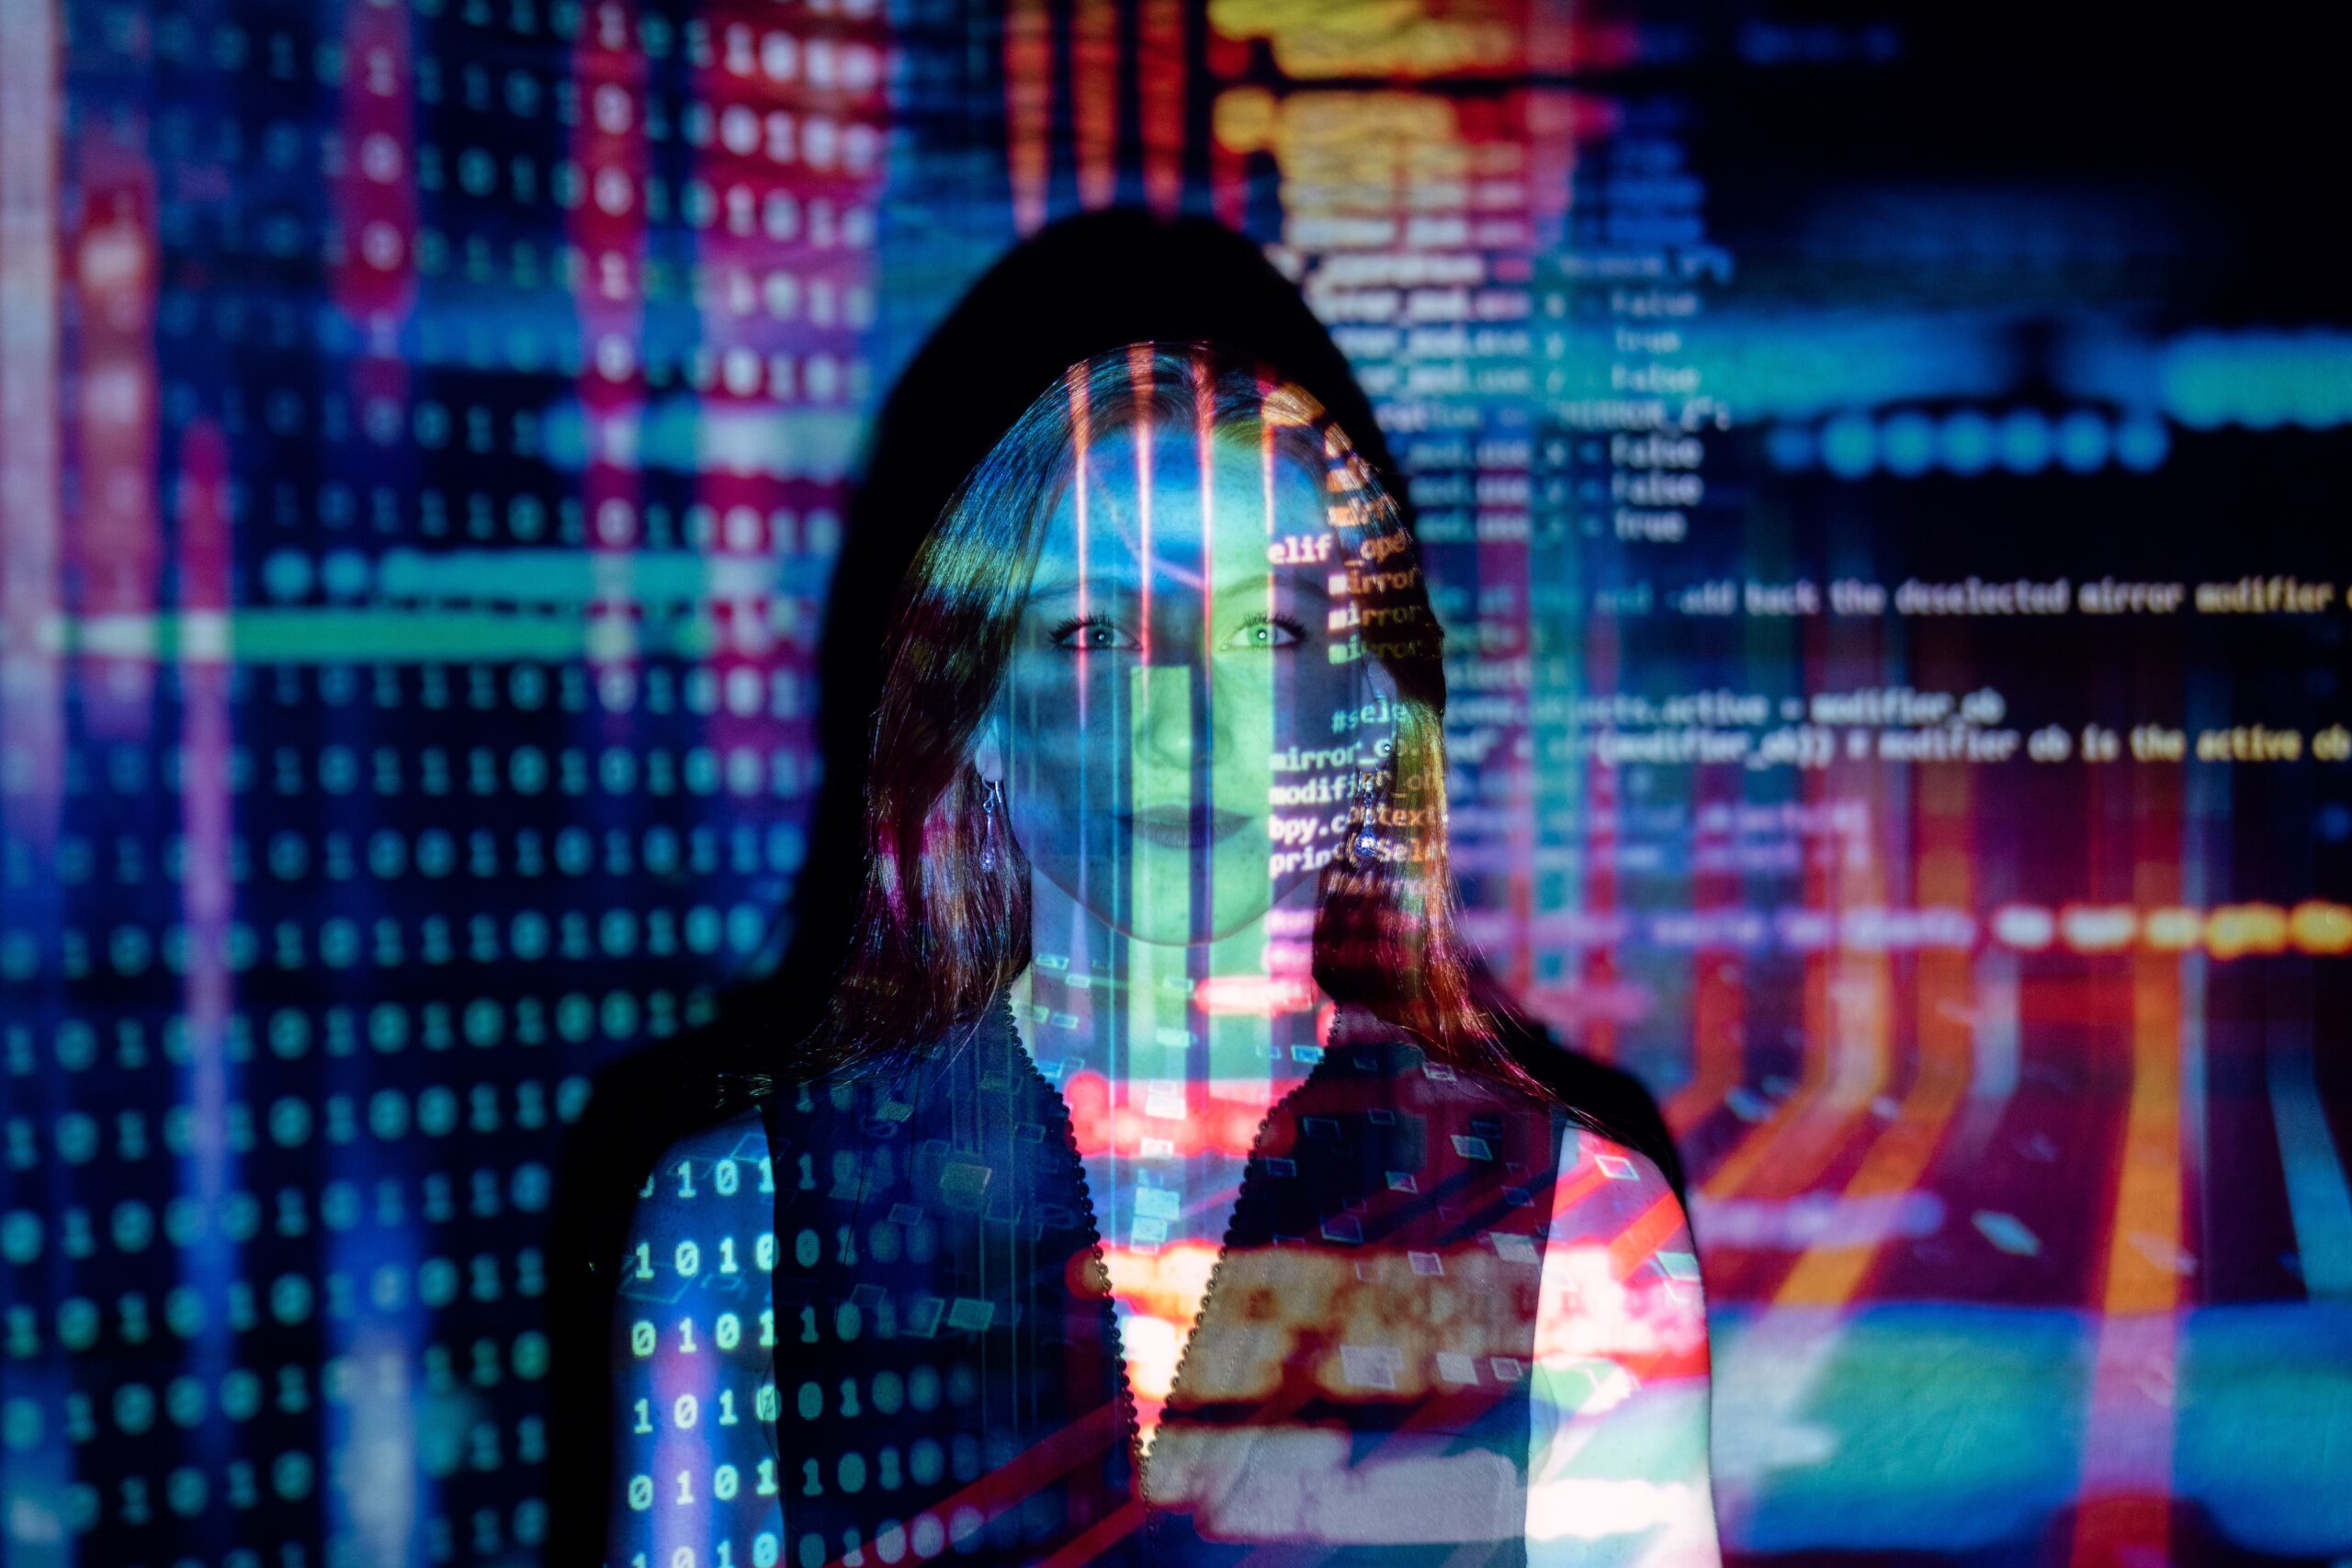 Woman with computer screen images covering her